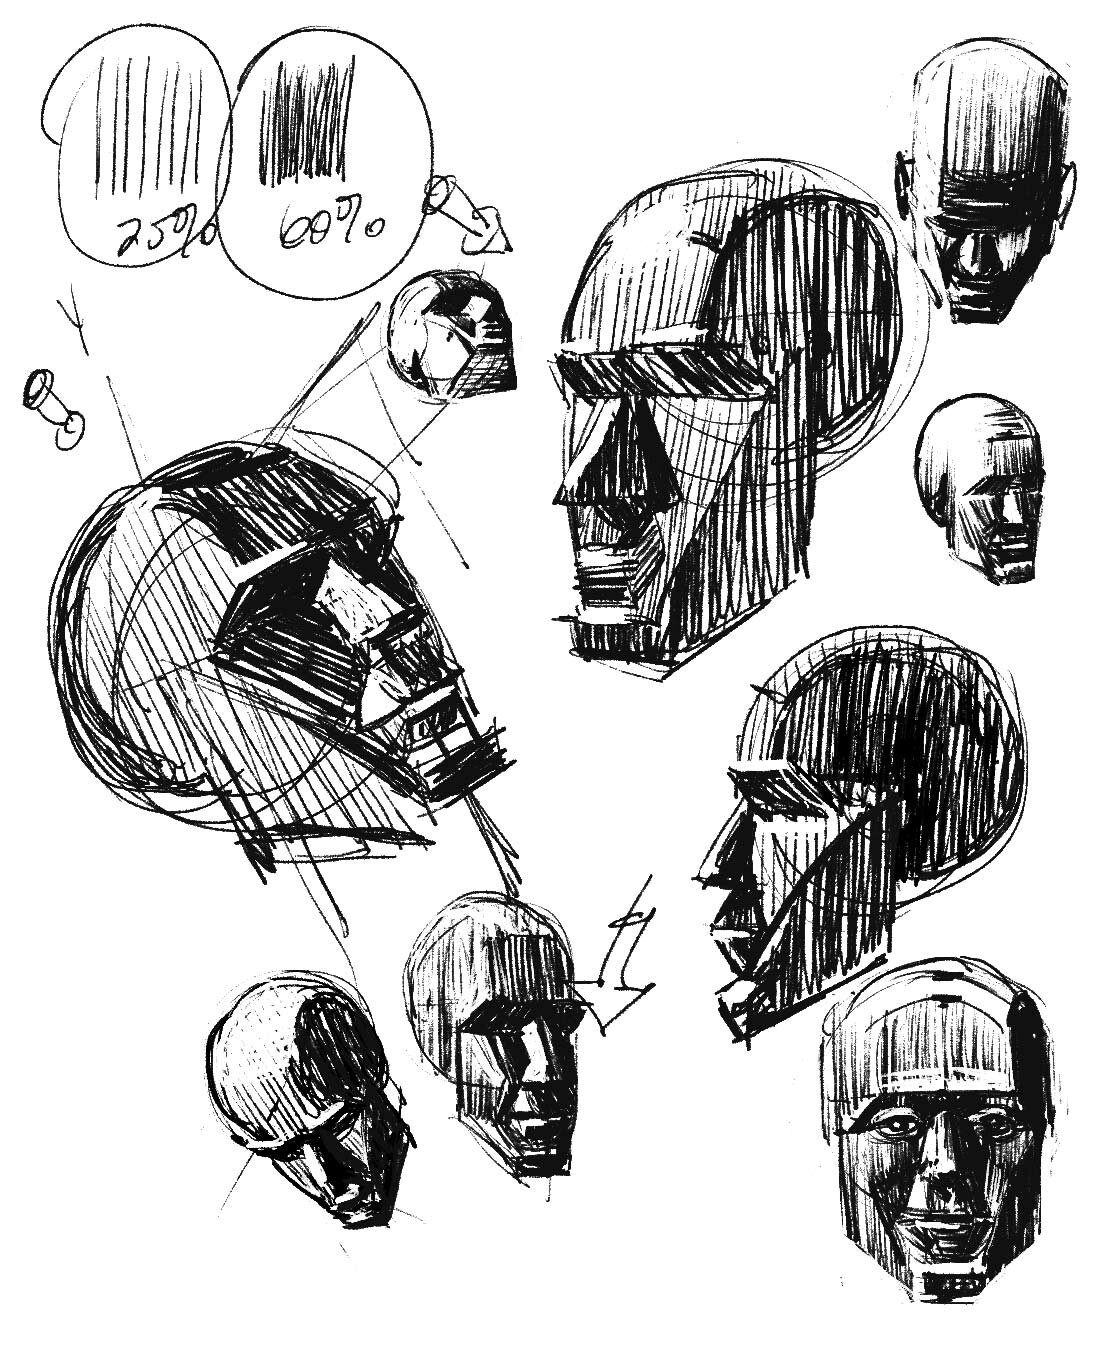 Quick Light and Shadow manikin head studies. Focus on the essential planes.